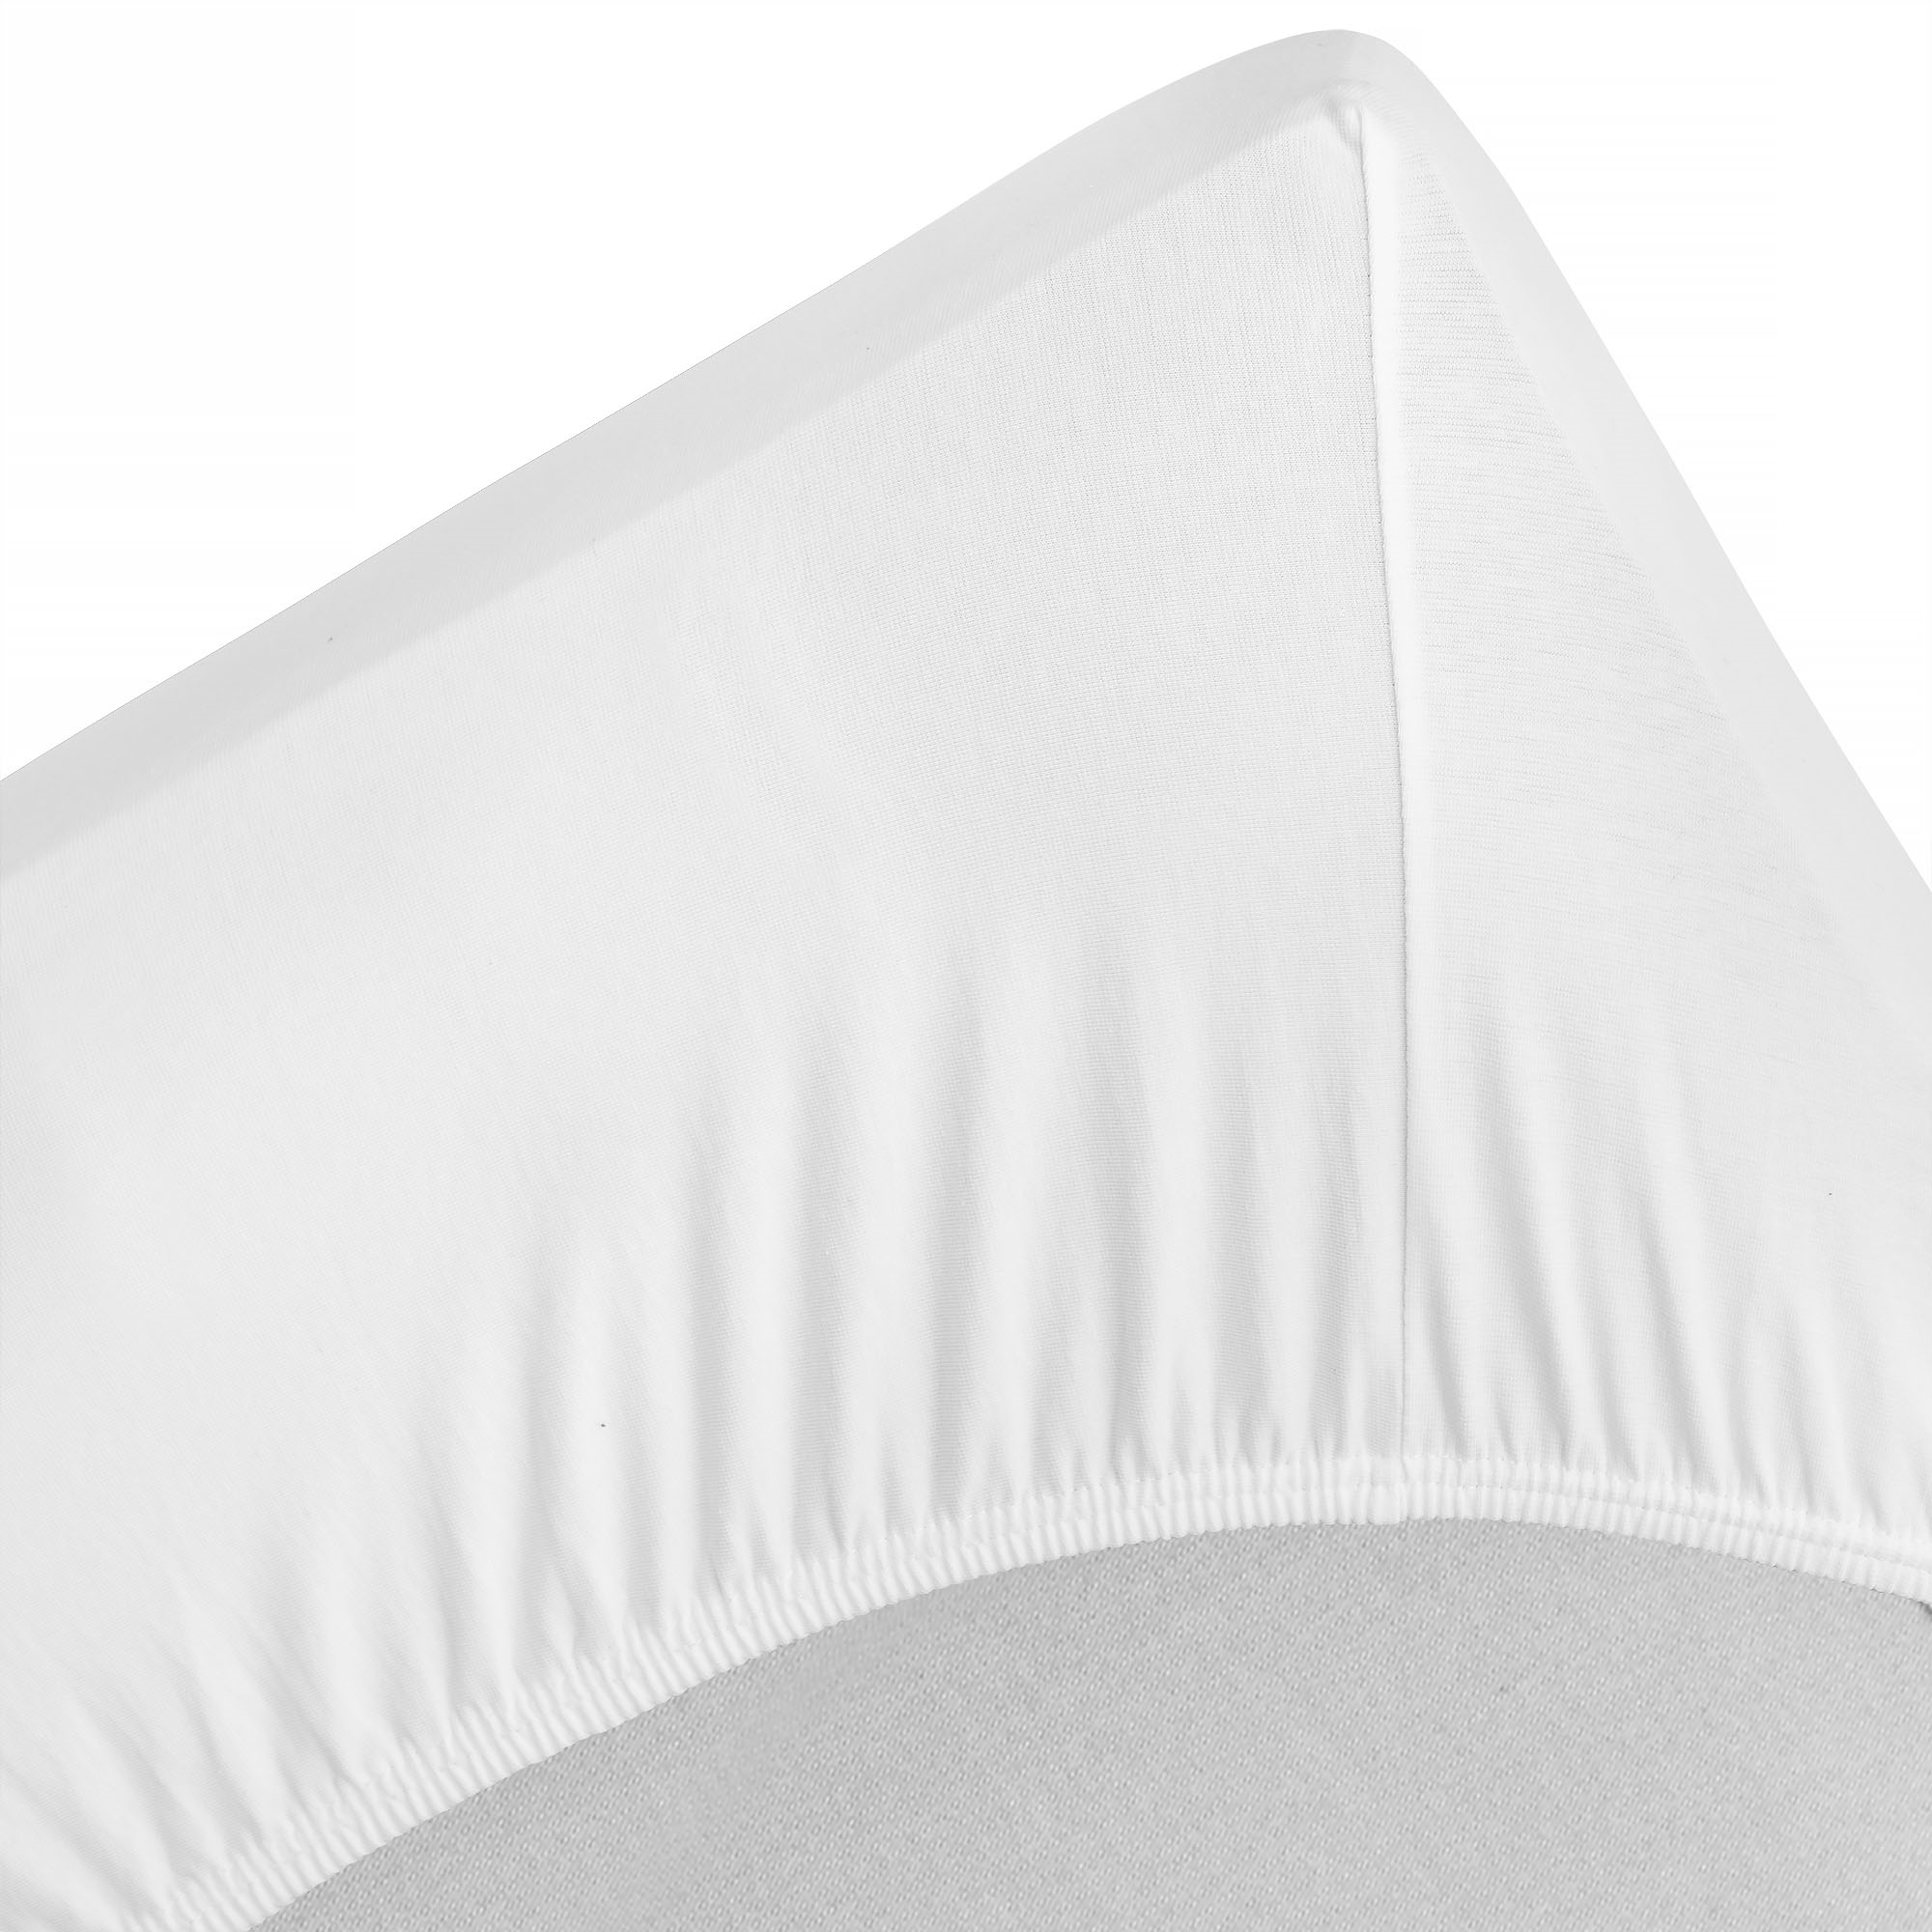 Mattress cover, fitted sheet 140x200 cm, White